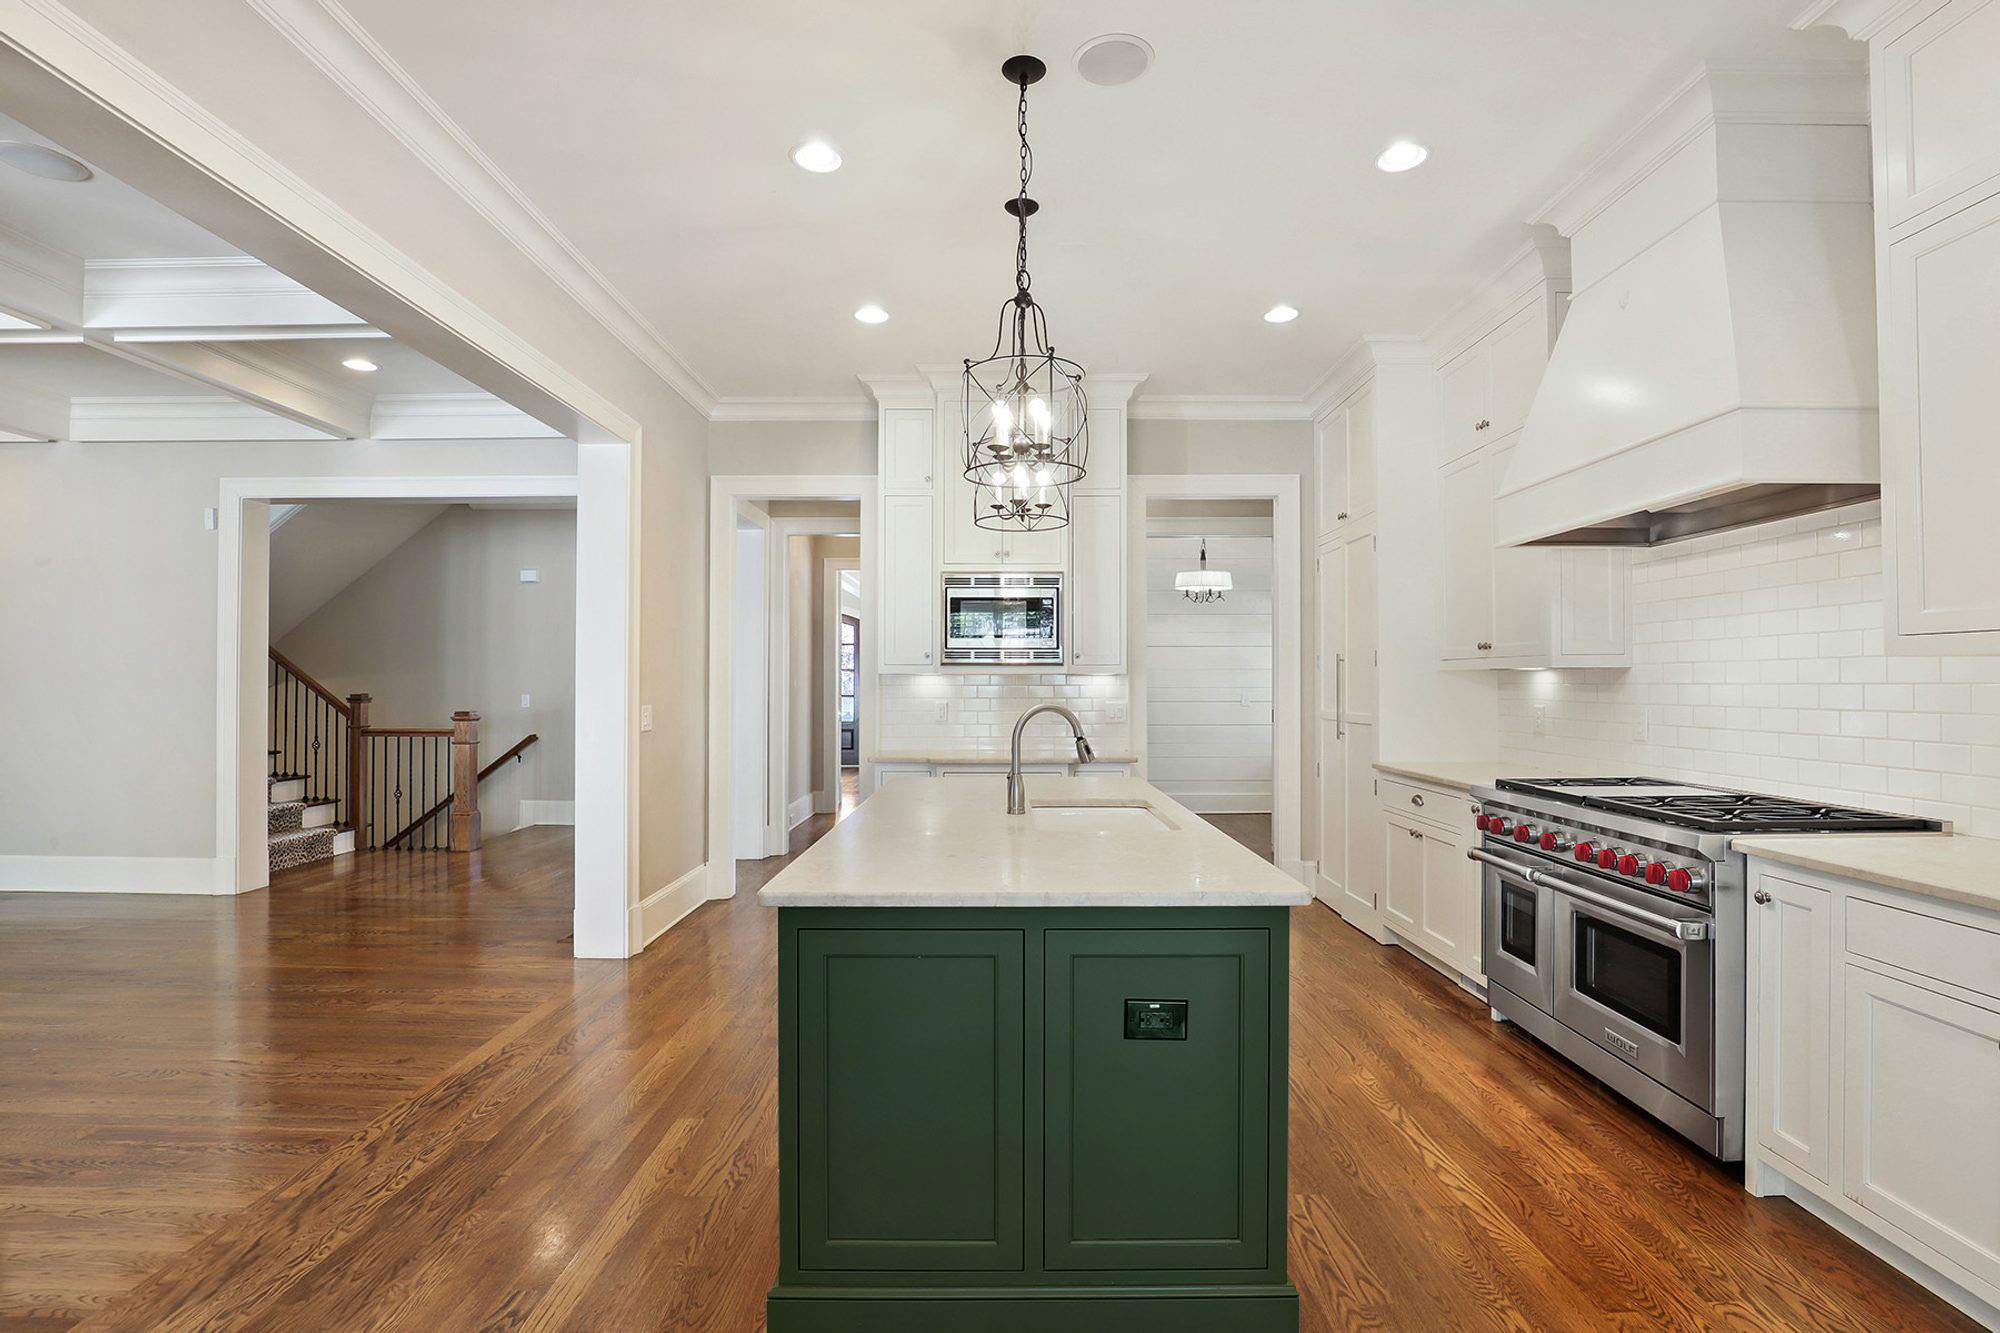 White kitchen cabinets with a forest green center island.